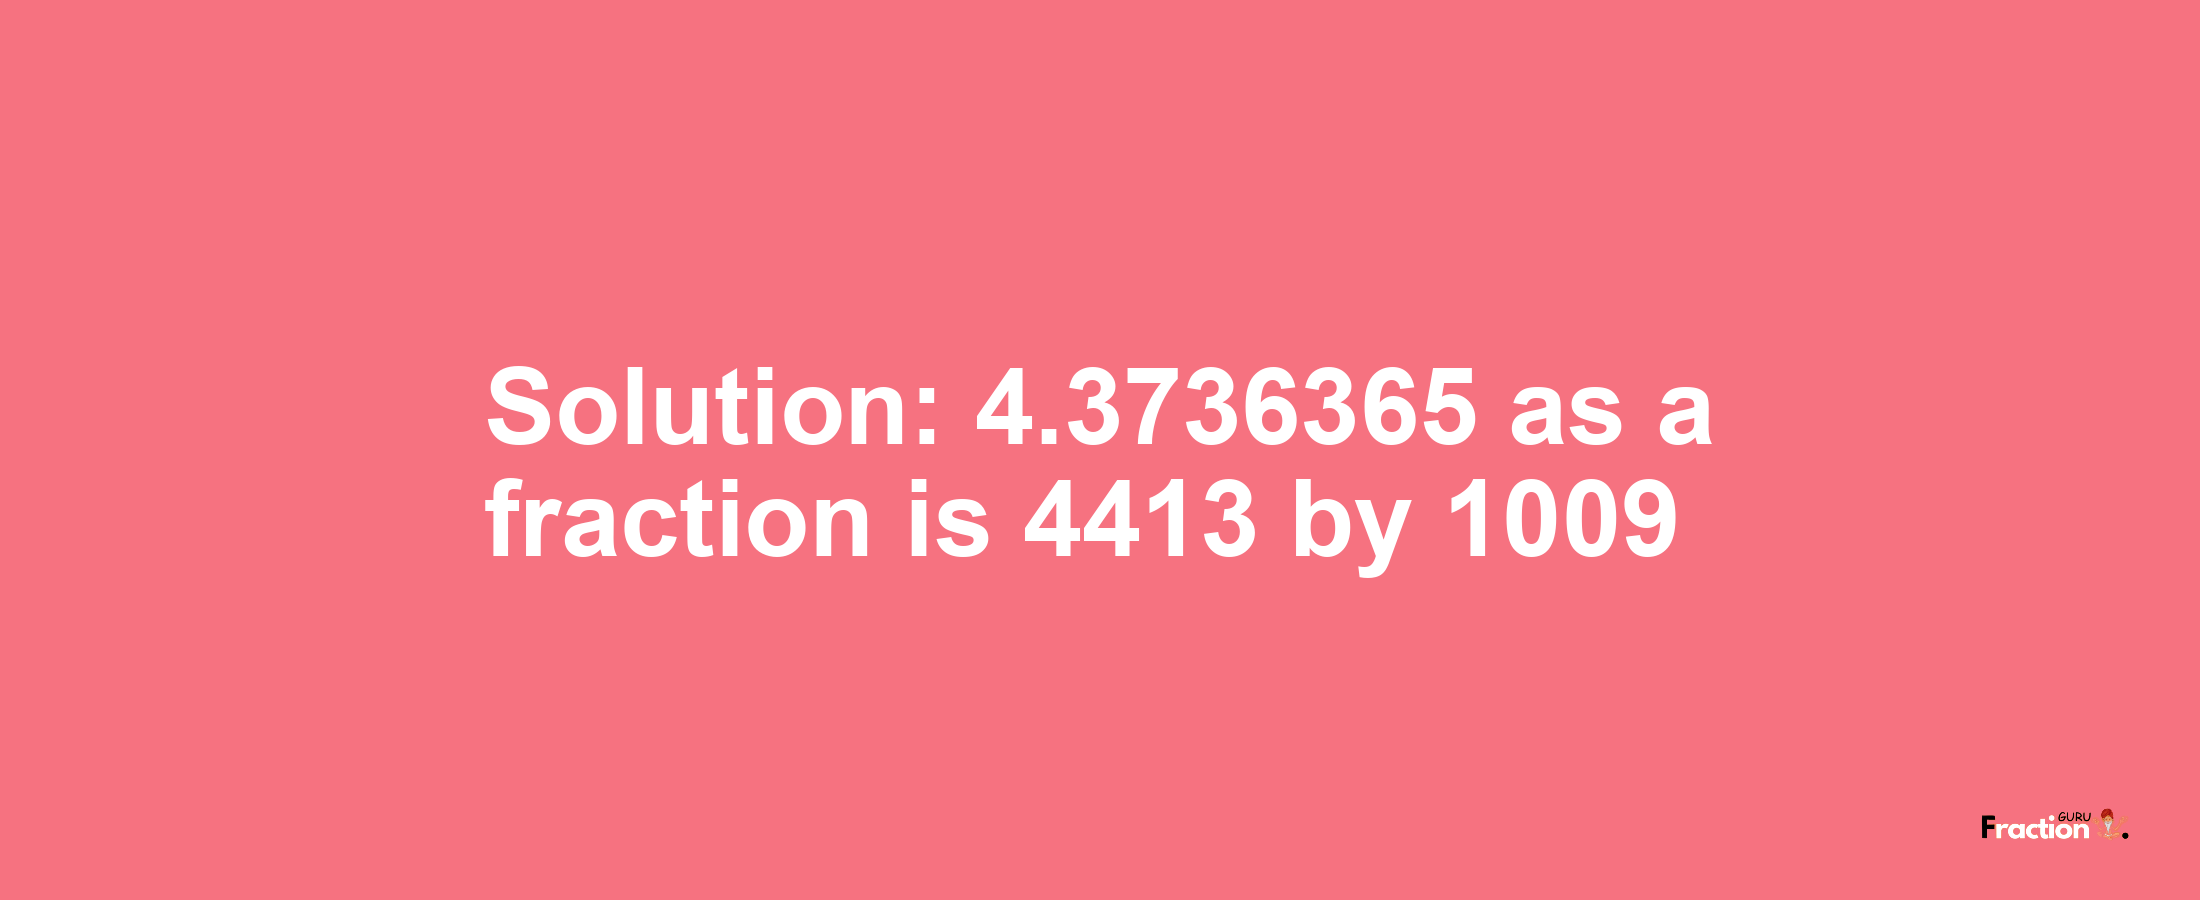 Solution:4.3736365 as a fraction is 4413/1009